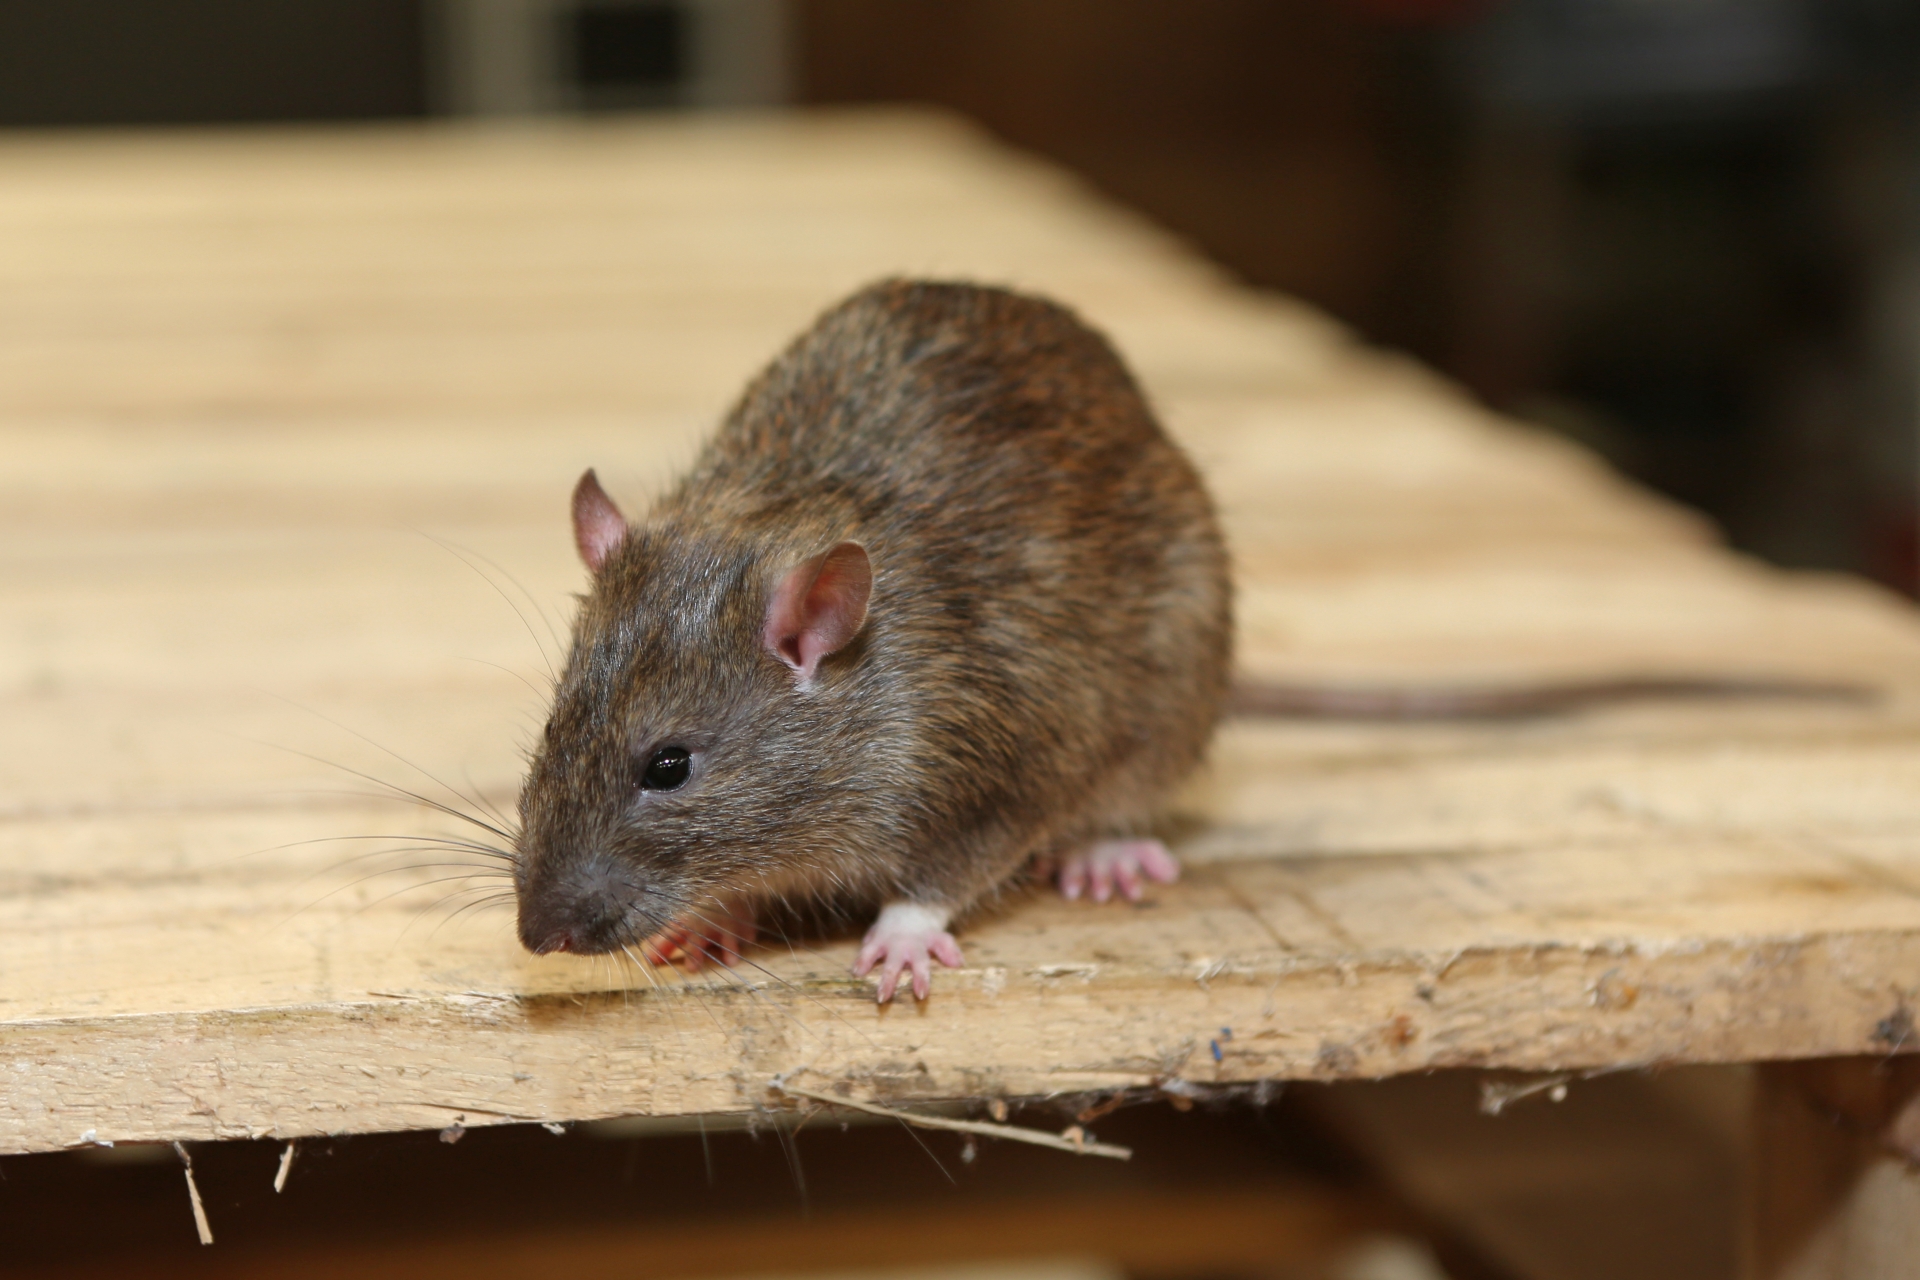 Rat Infestation, Pest Control in Chiswick, W4. Call Now 020 8166 9746